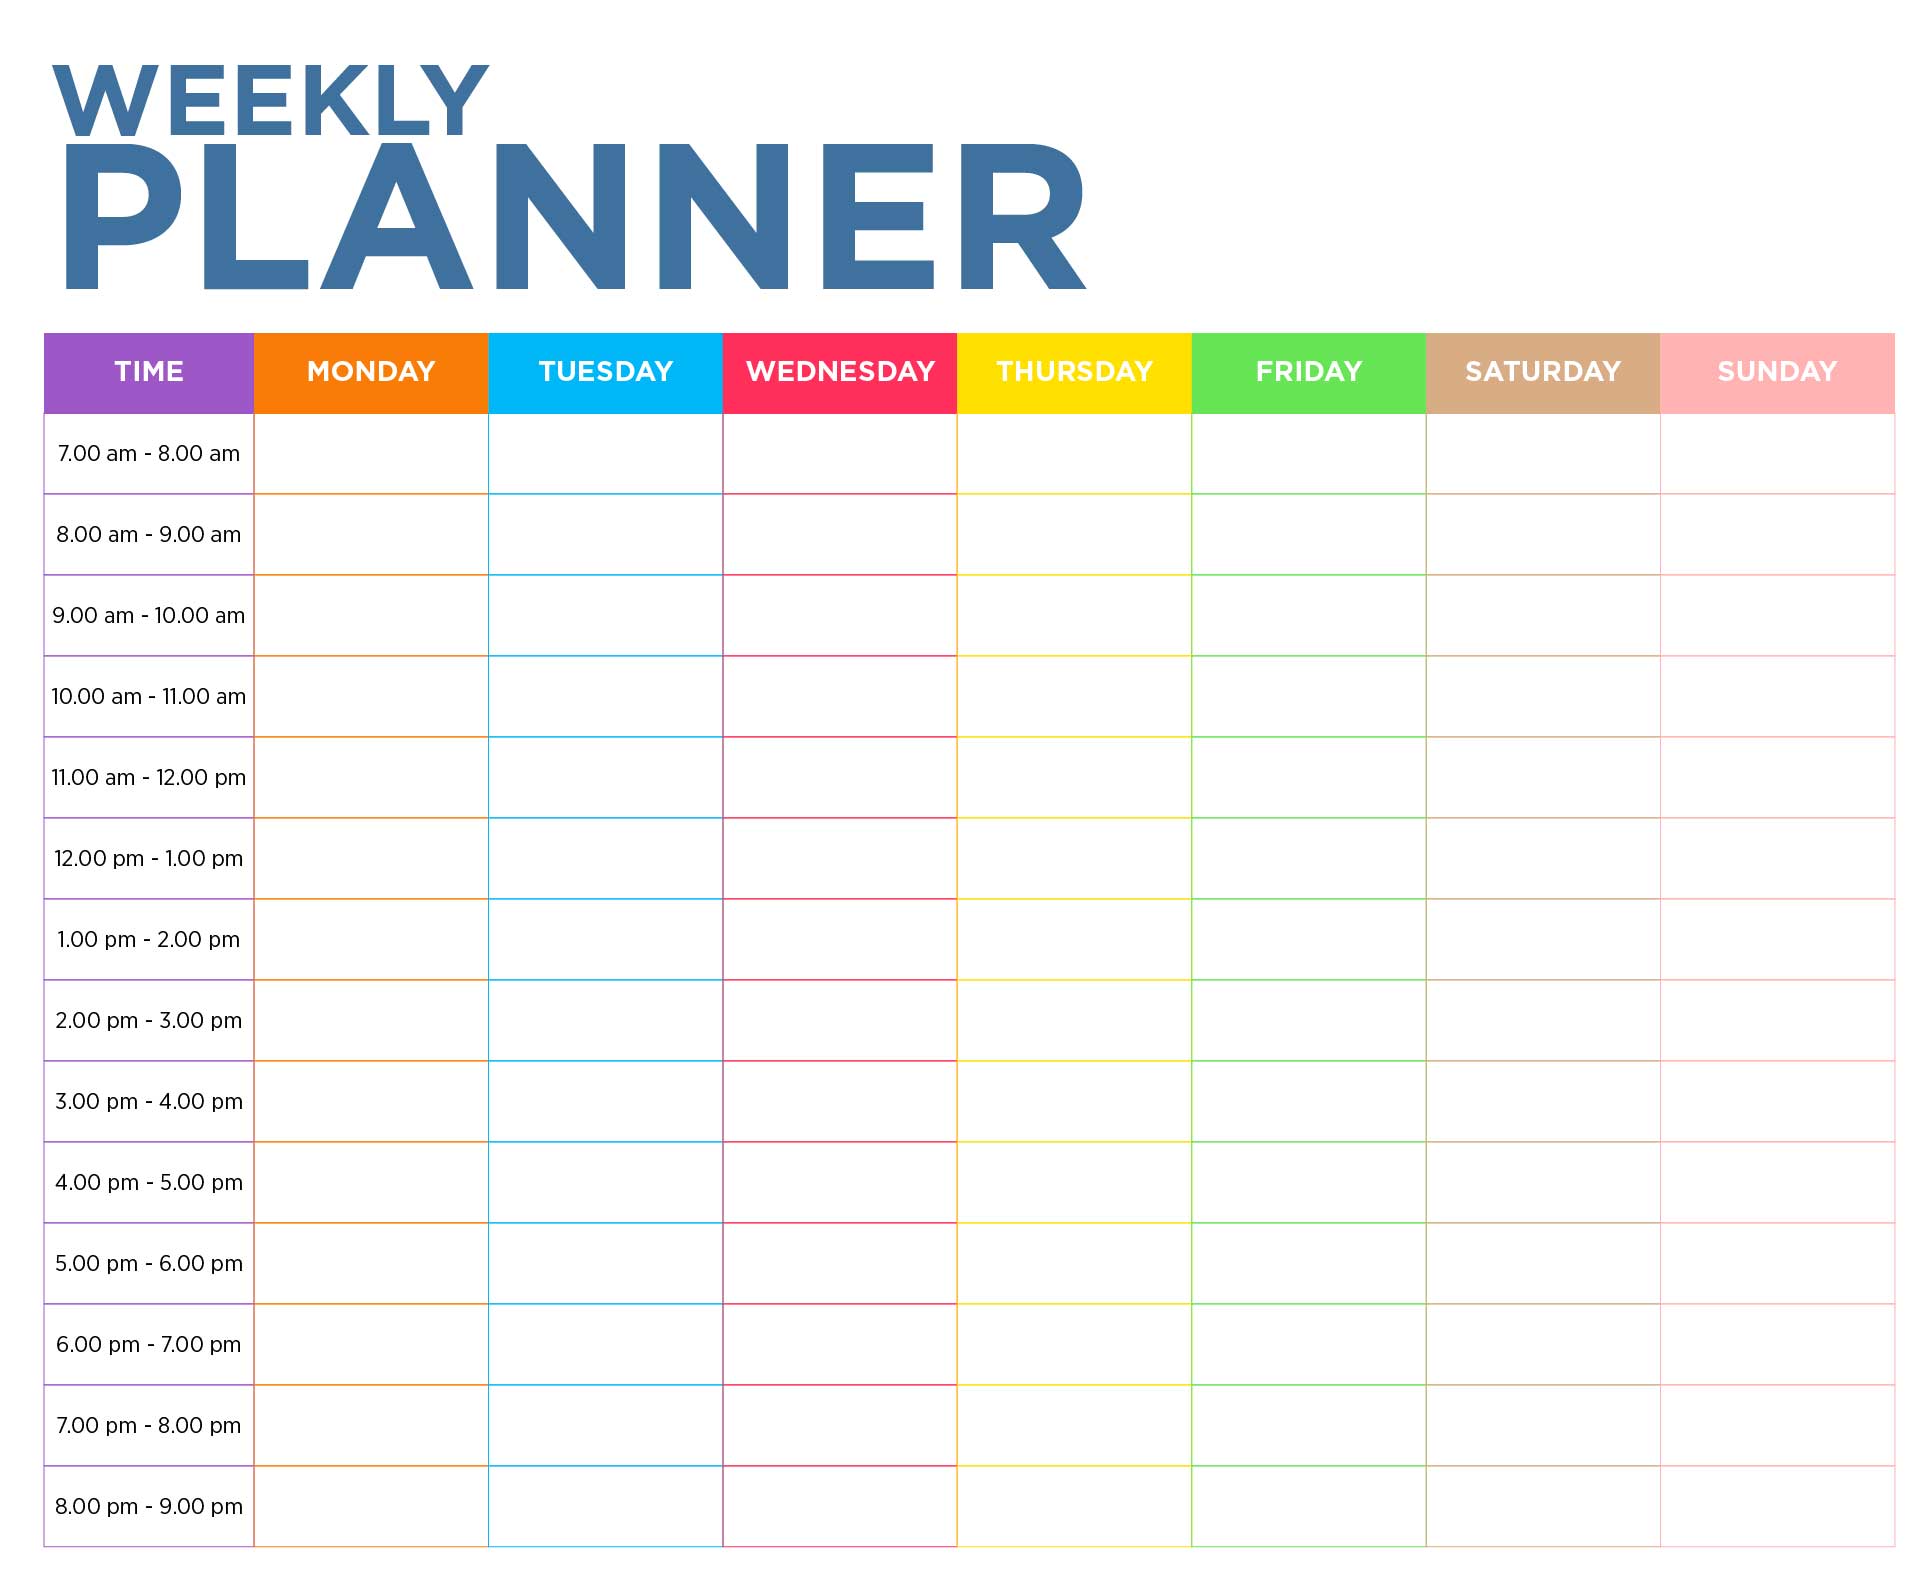 Weekly Hourly Schedule Template